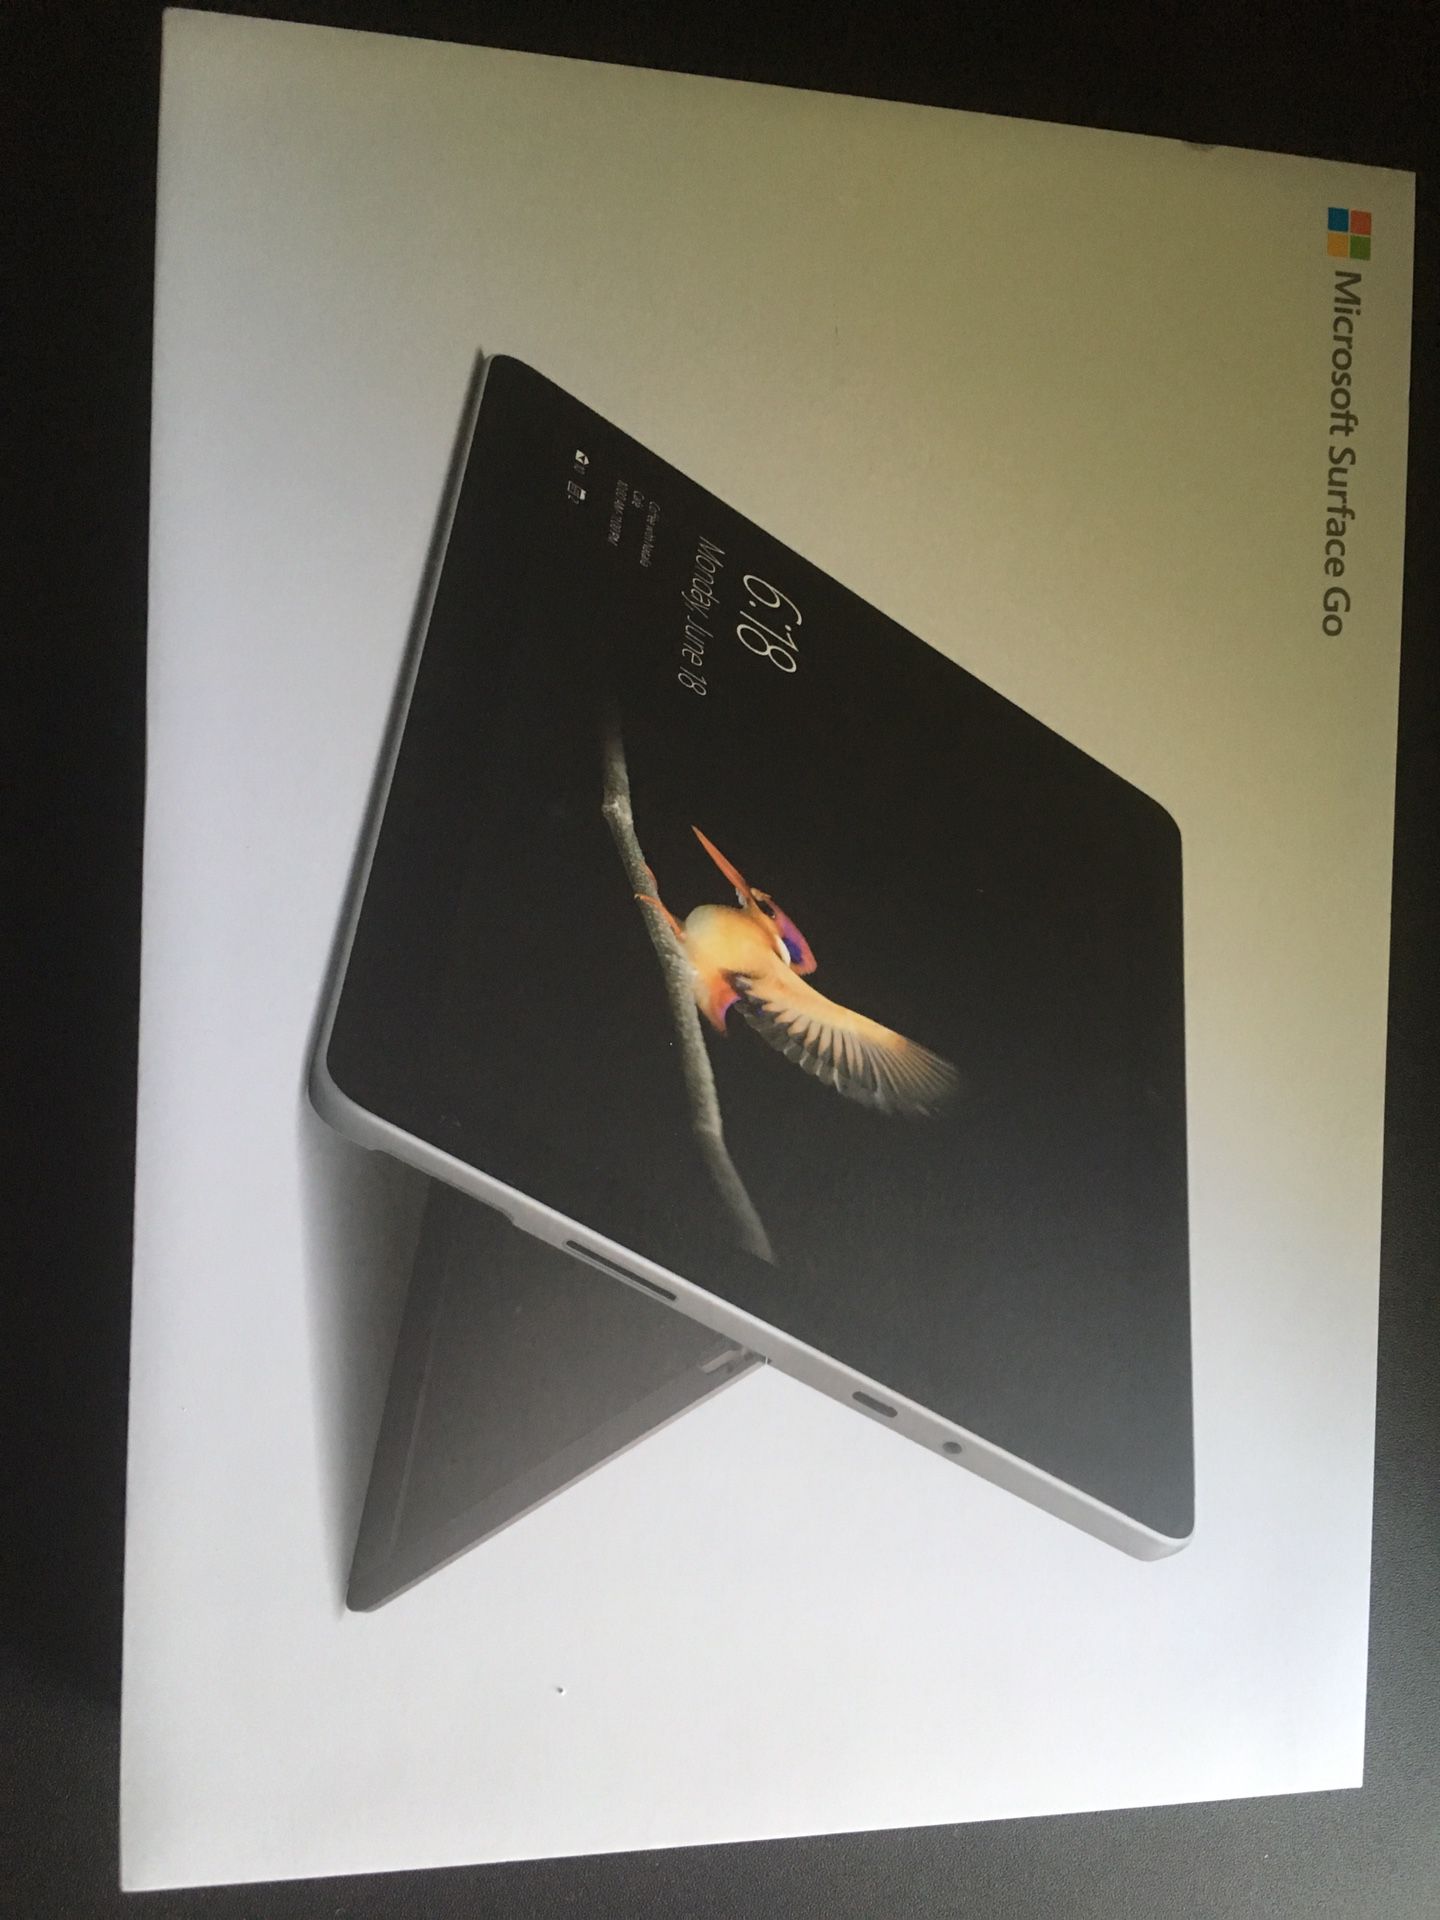 Microsoft Surface Go Tablet (Like New)!